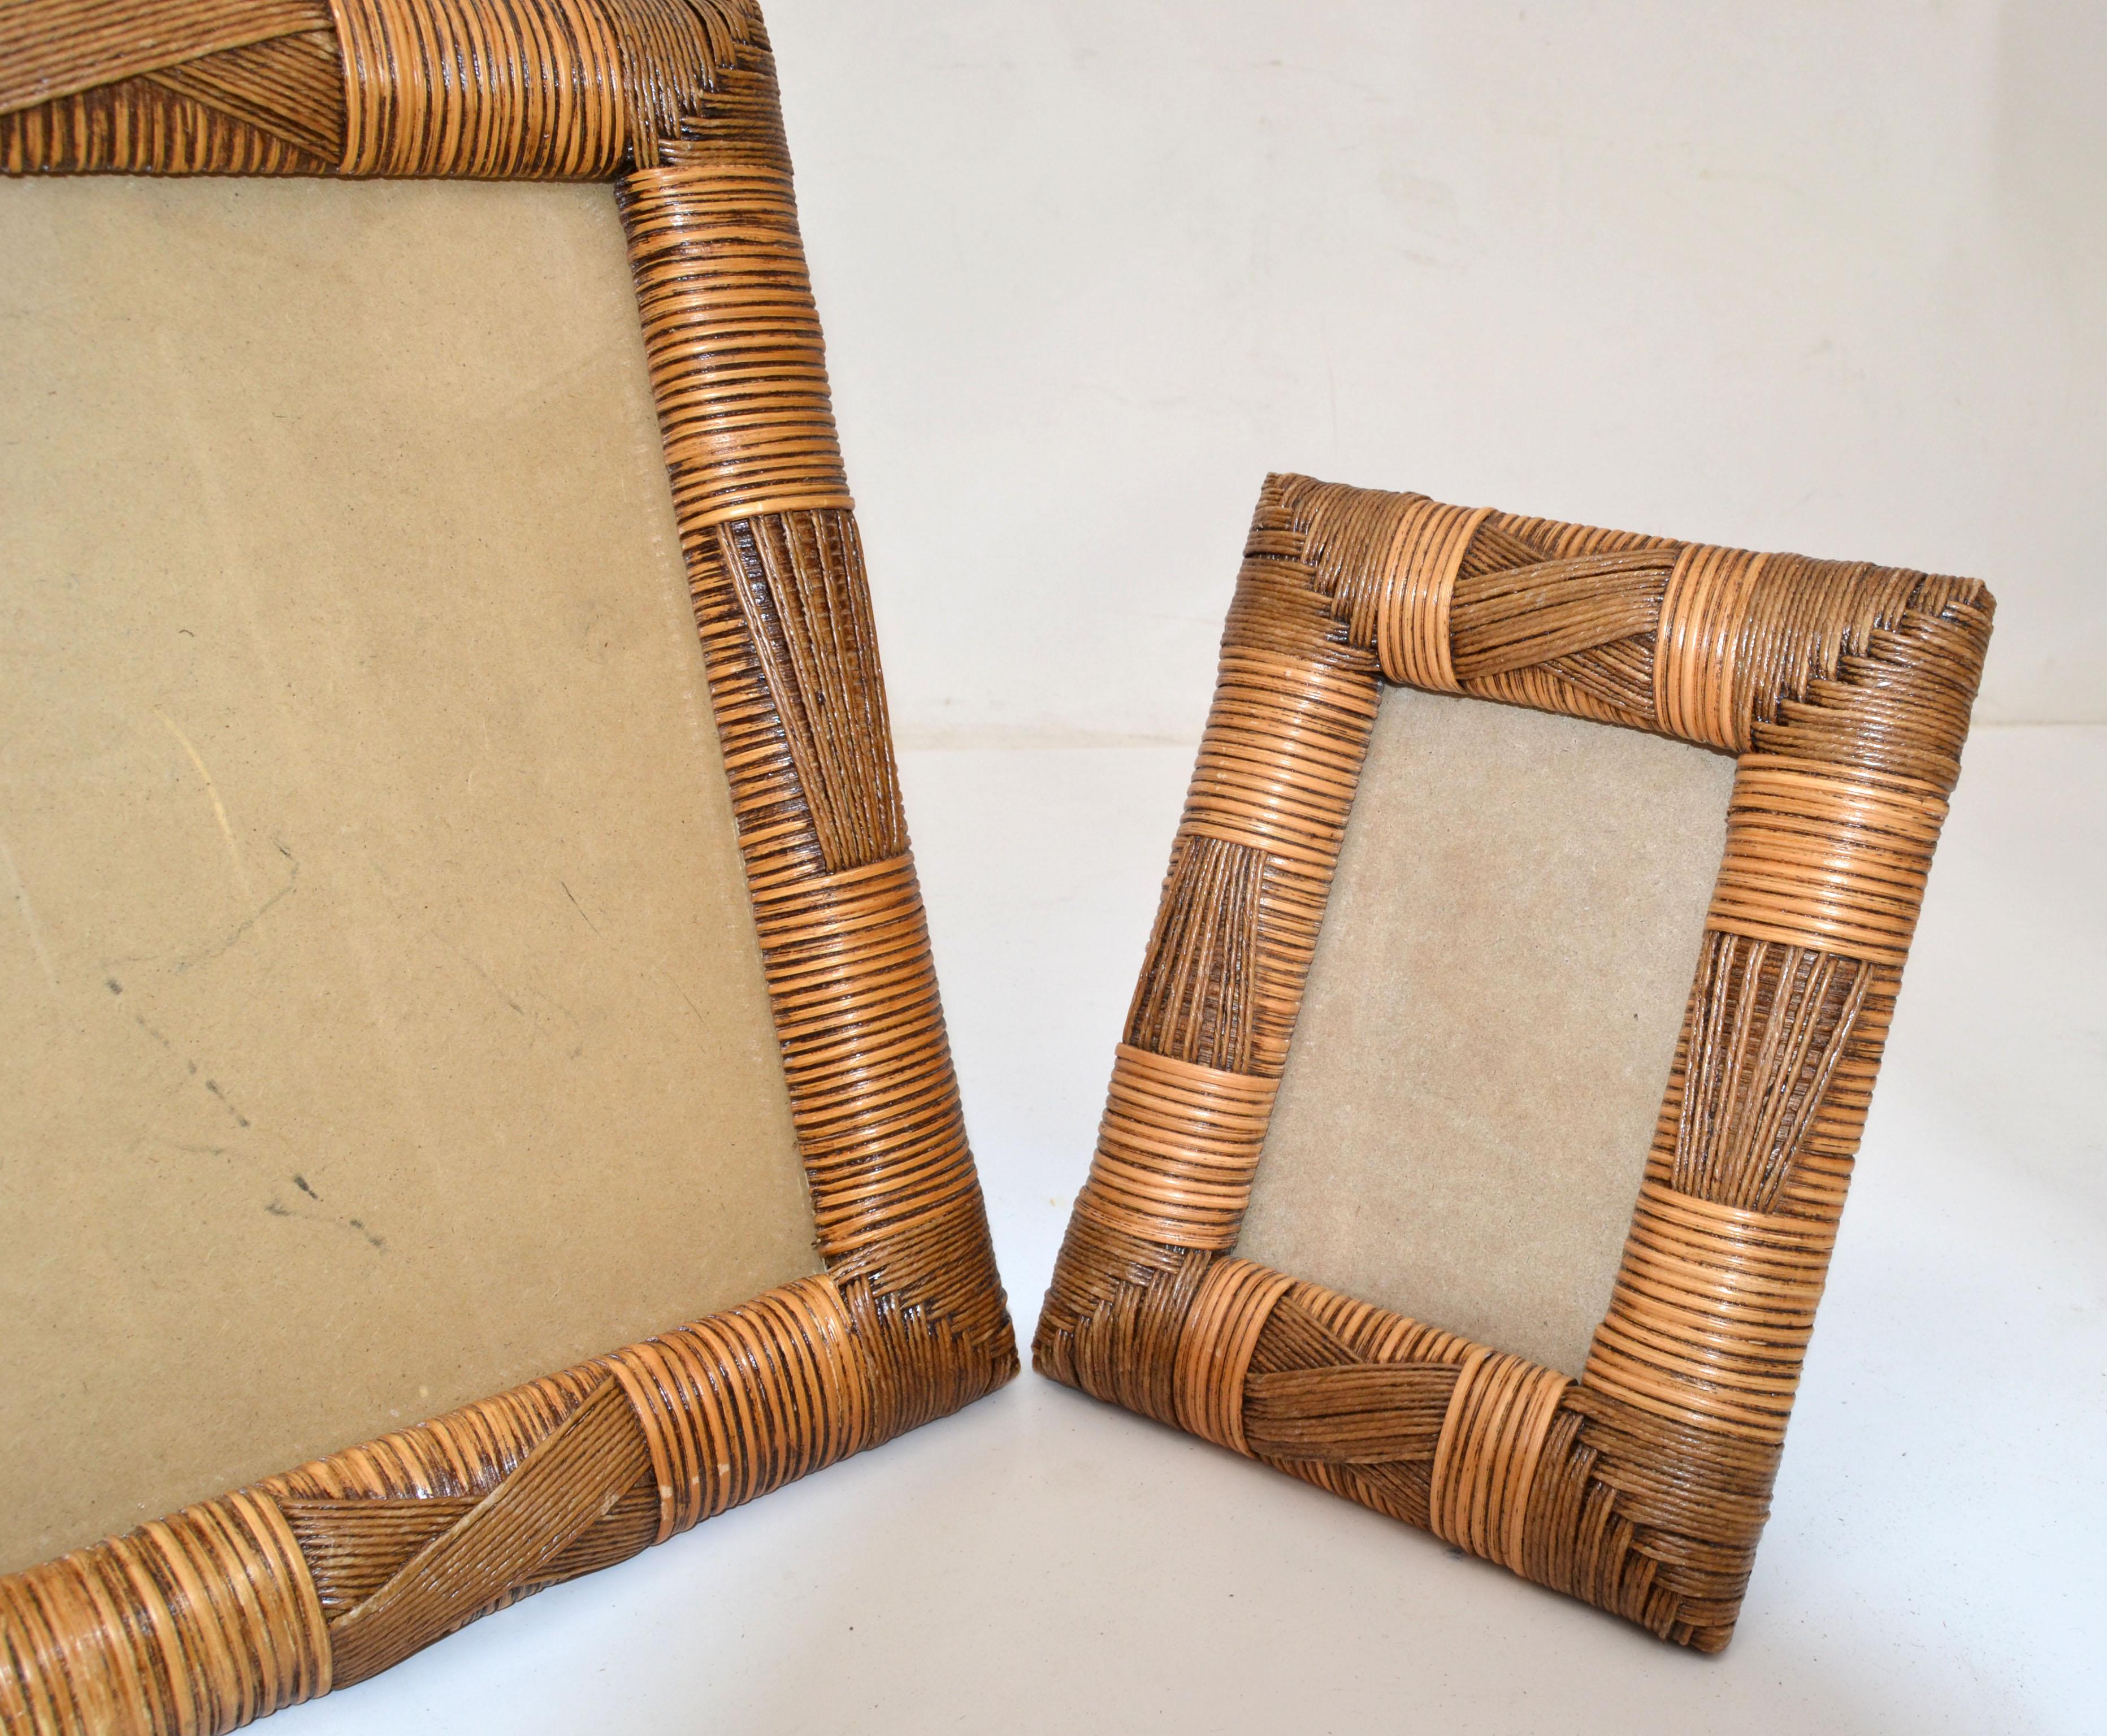 Set of 3 Cane, Wicker & Bamboo Picture Frames Bohemian Chic Mid-Century Modern In Good Condition For Sale In Miami, FL